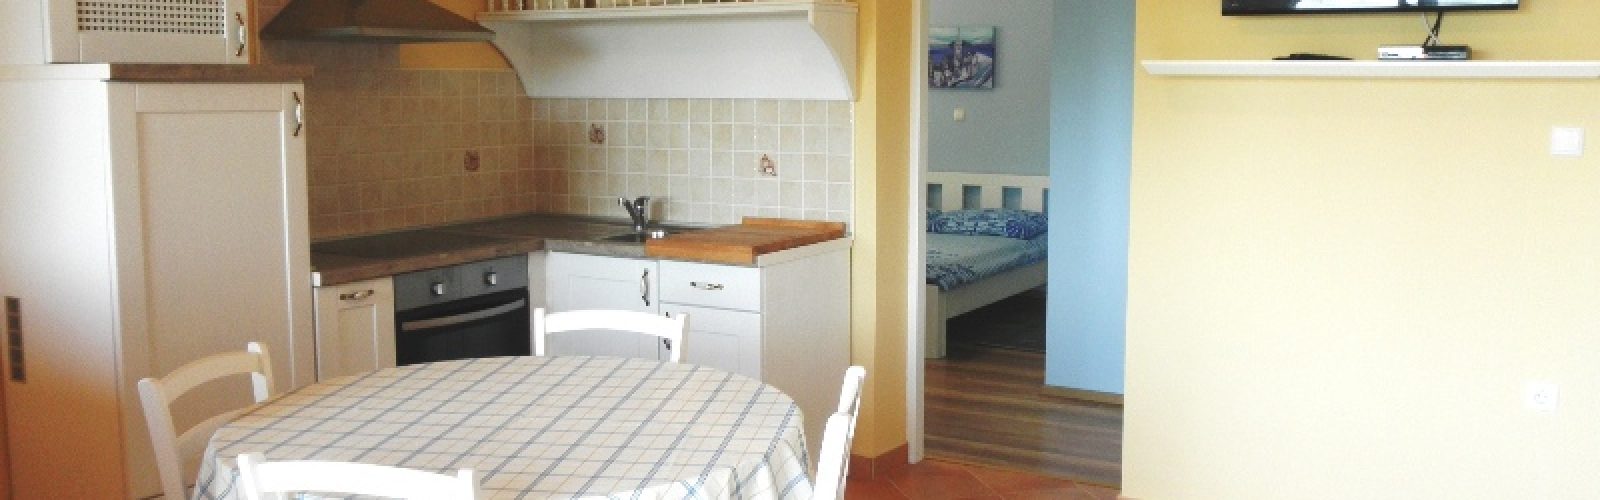 stay in rab apartments A2 DK7 1 1600x500 - Comfort 1 Bedroom Apartment with Terrace